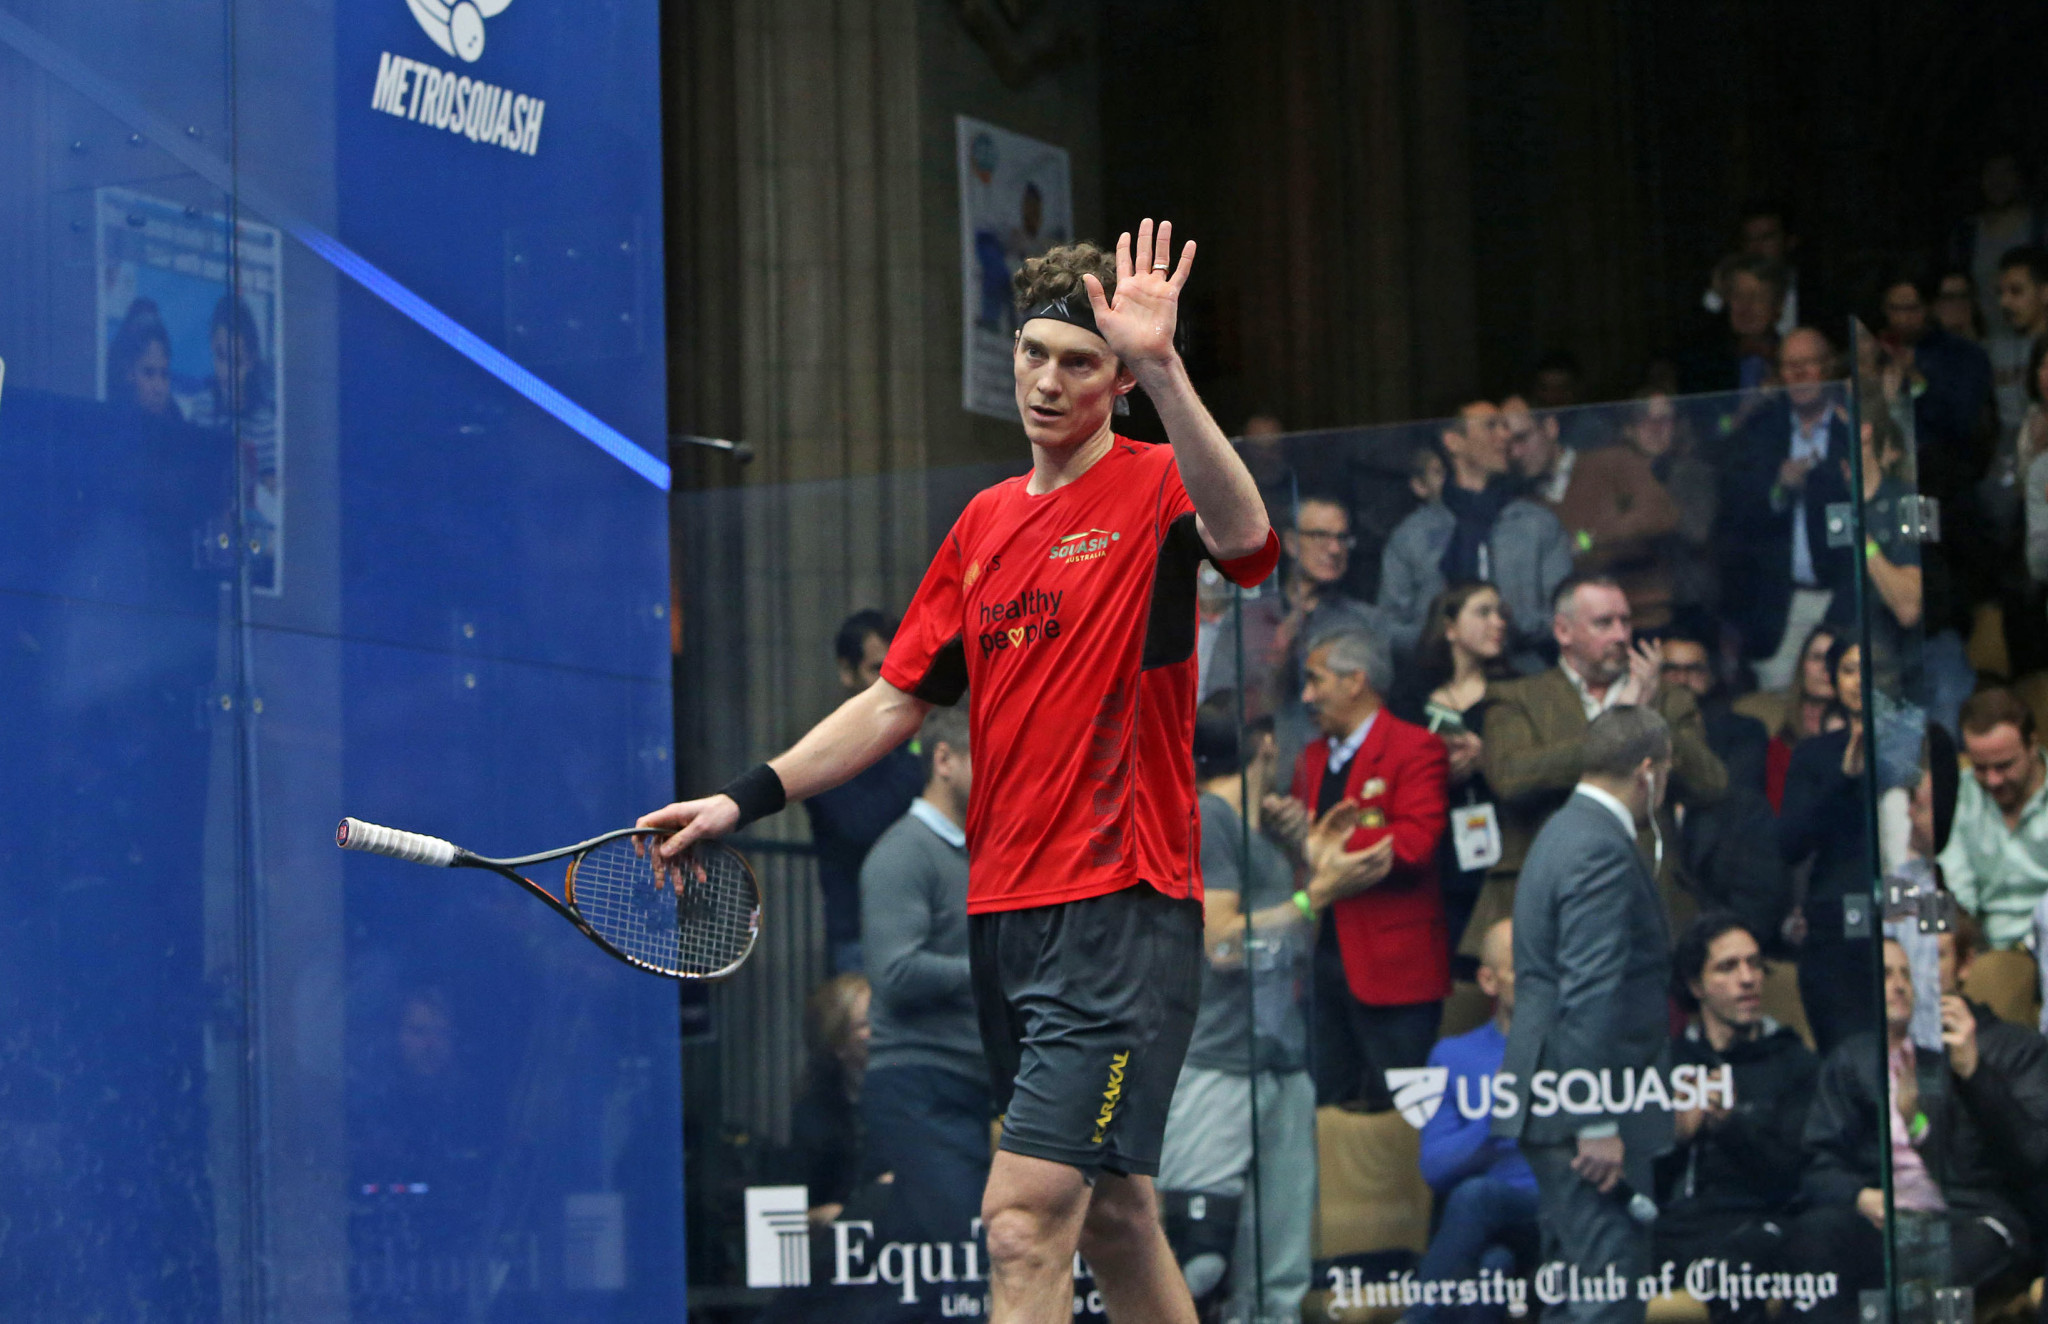 Australia's Cameron Pilley booked his place in the quarter-final of the Windy City with a shock victory over England's Nick Matthew ©PSA